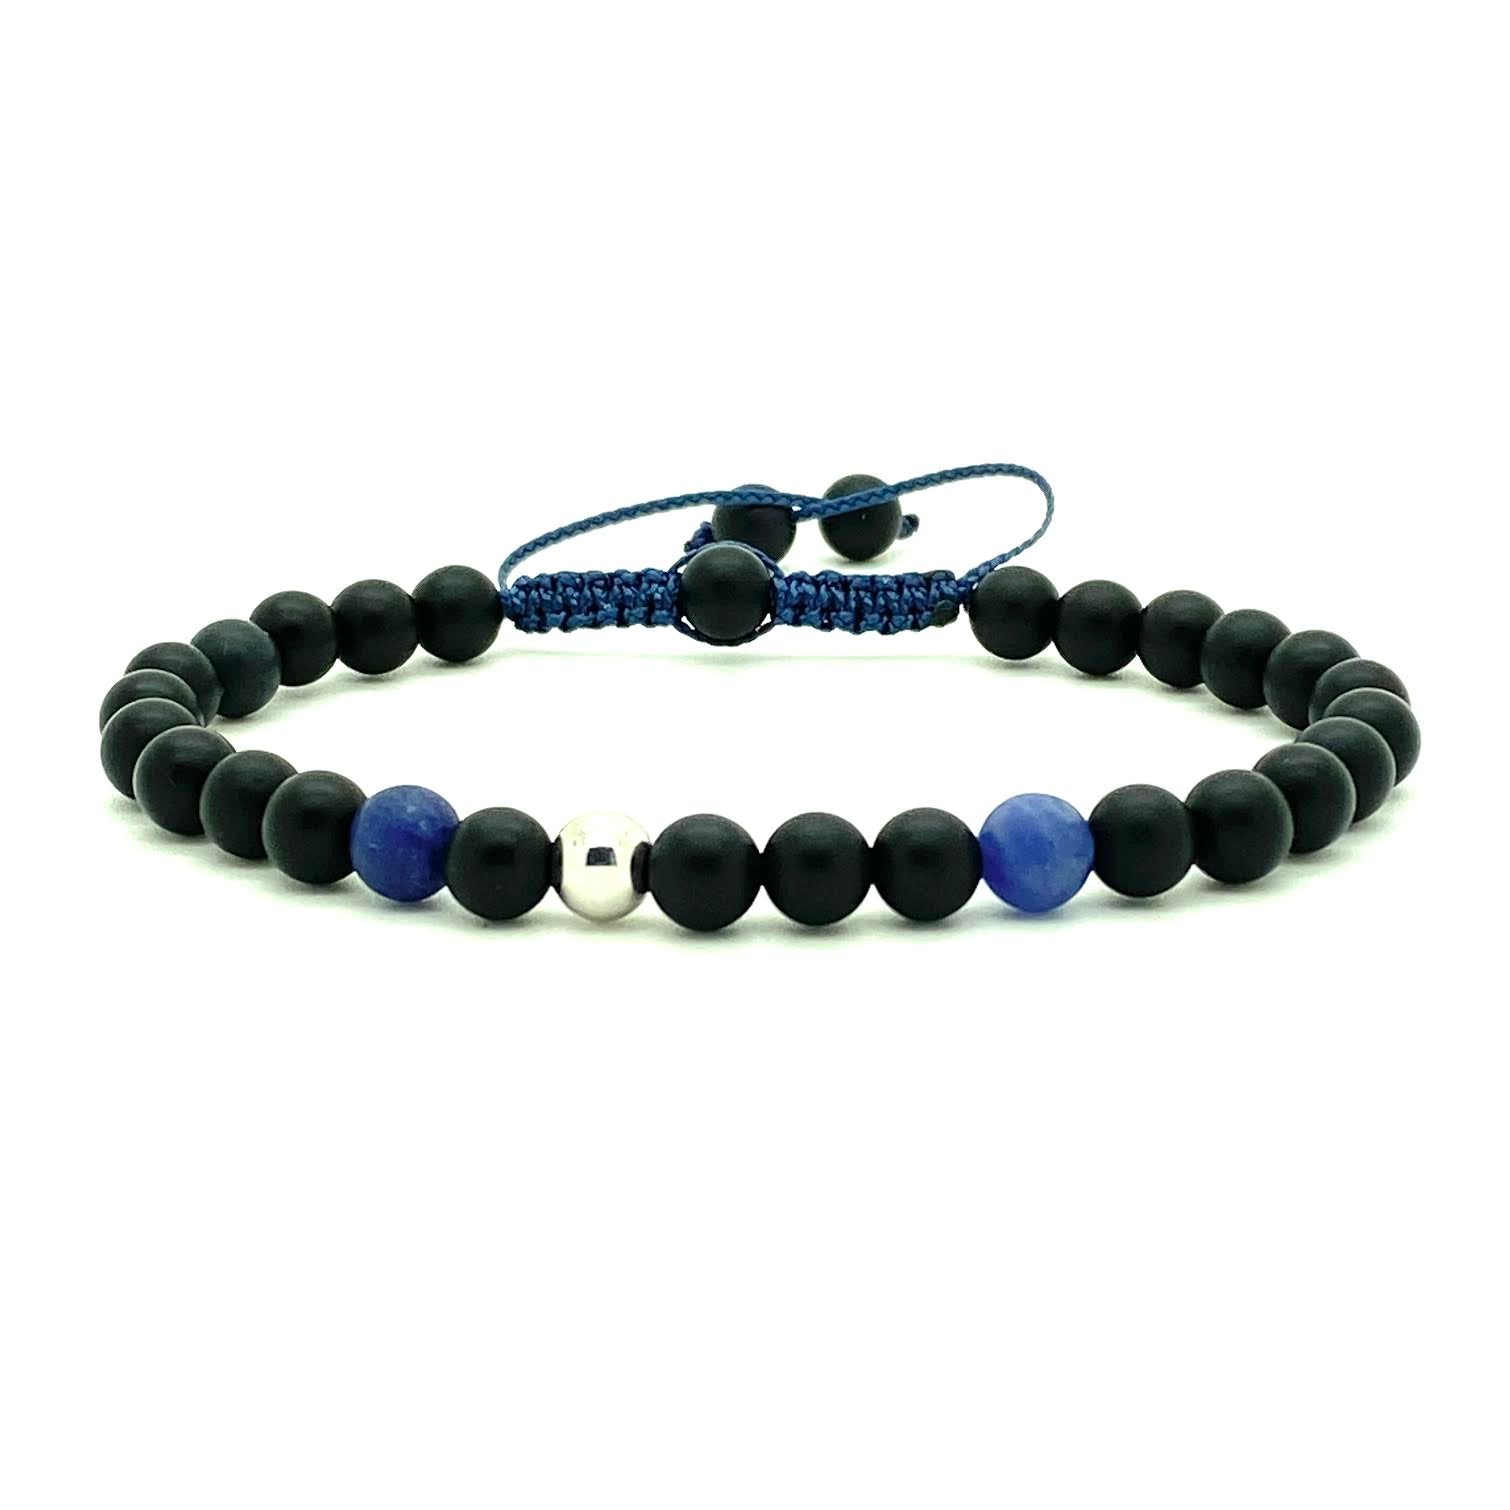 Trendy black matte onyx beads accented with two Sodalite beads, and your choice of a 14K solid white, rose or yellow gold bead. Hand knotted adjustable cord for a perfect fit. Made by WristBend